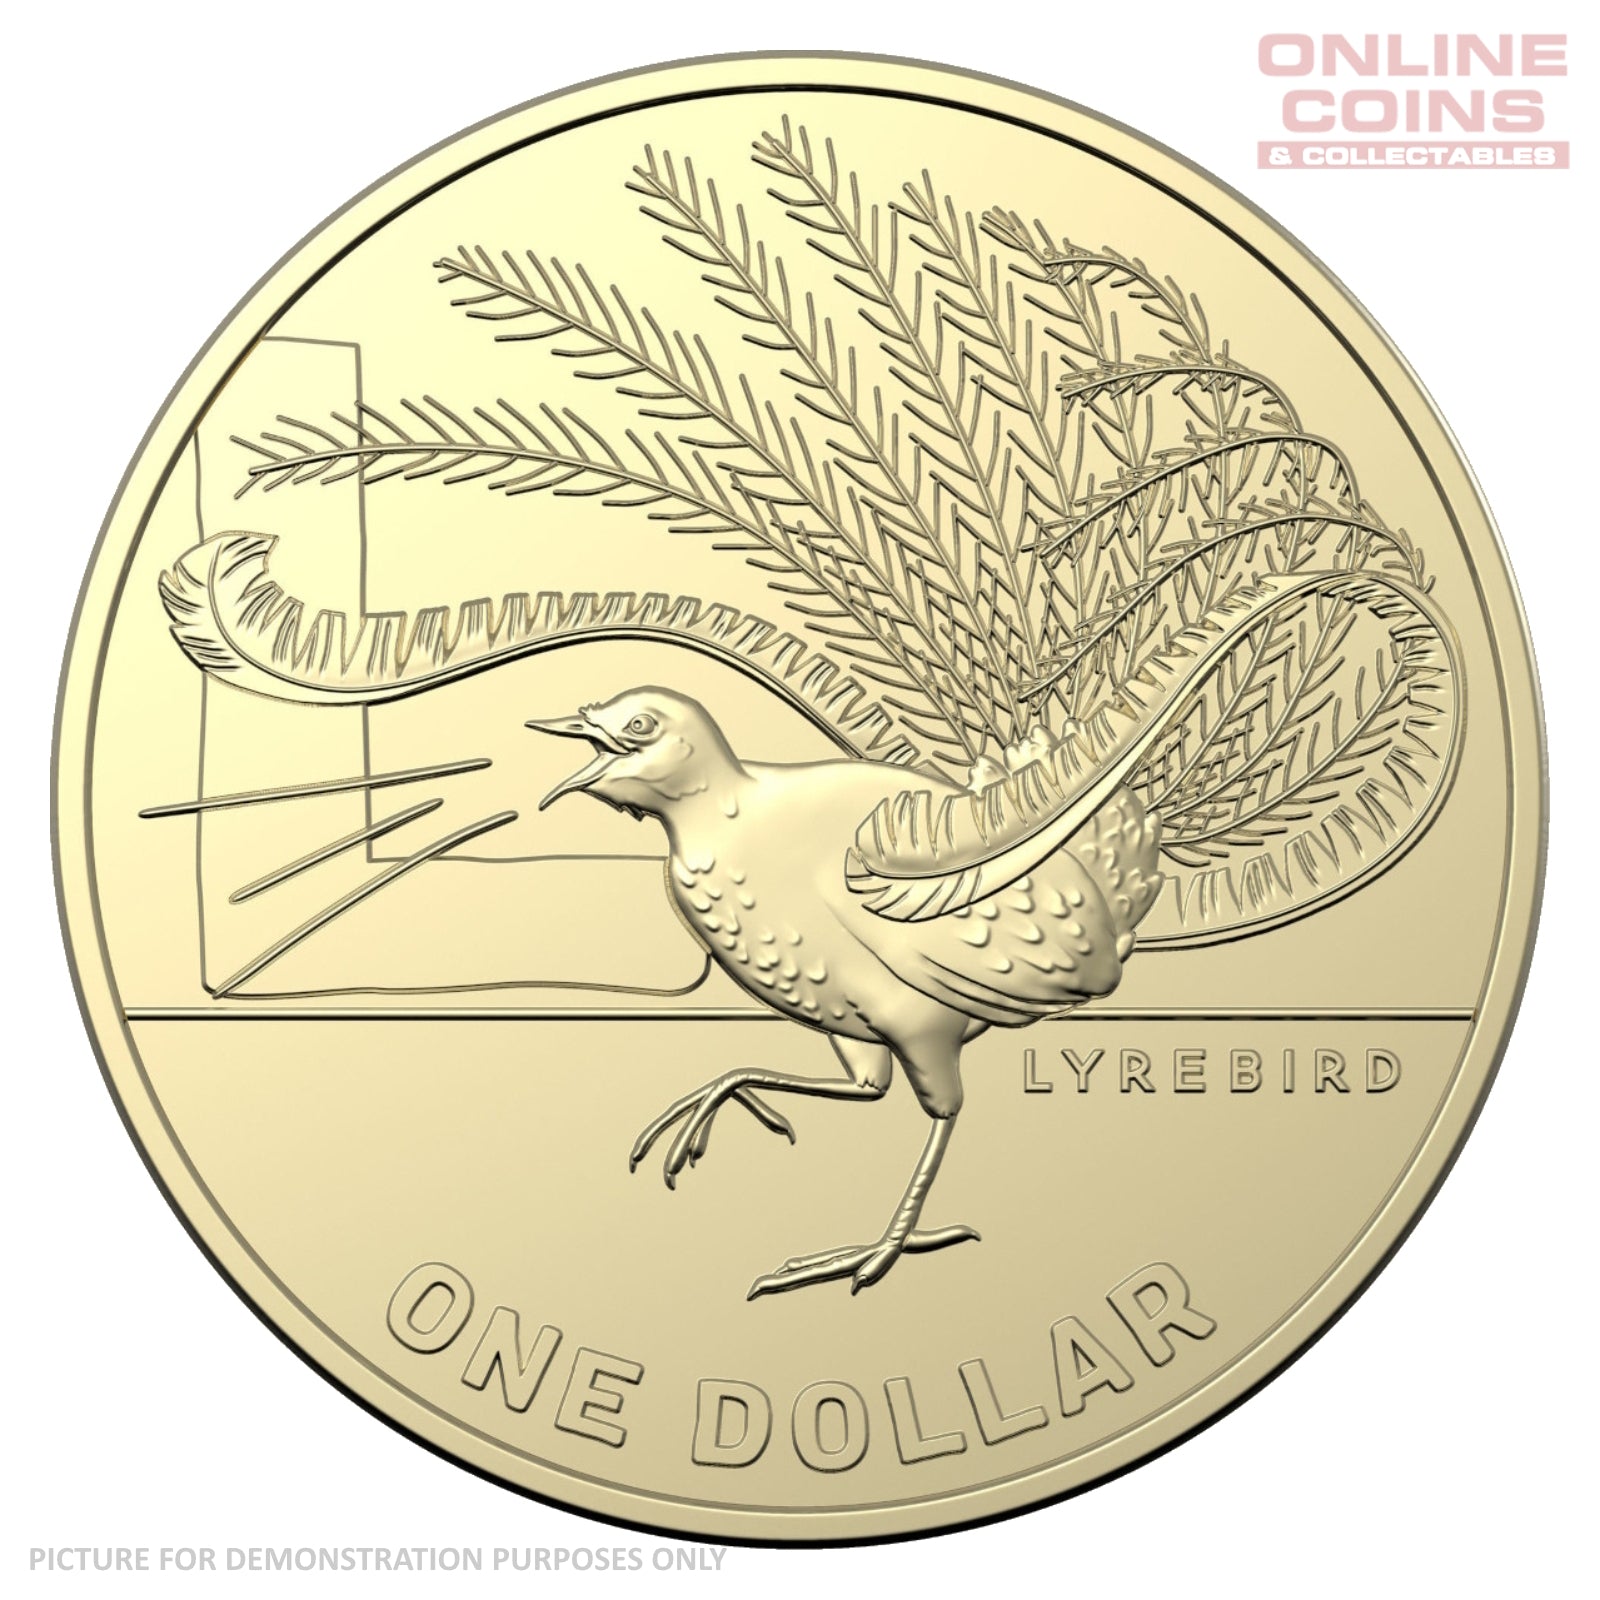 2021 Australian $1 Coin Hunt 2 L Lyrebird - Uncirculated Loose Coin From Security Bag